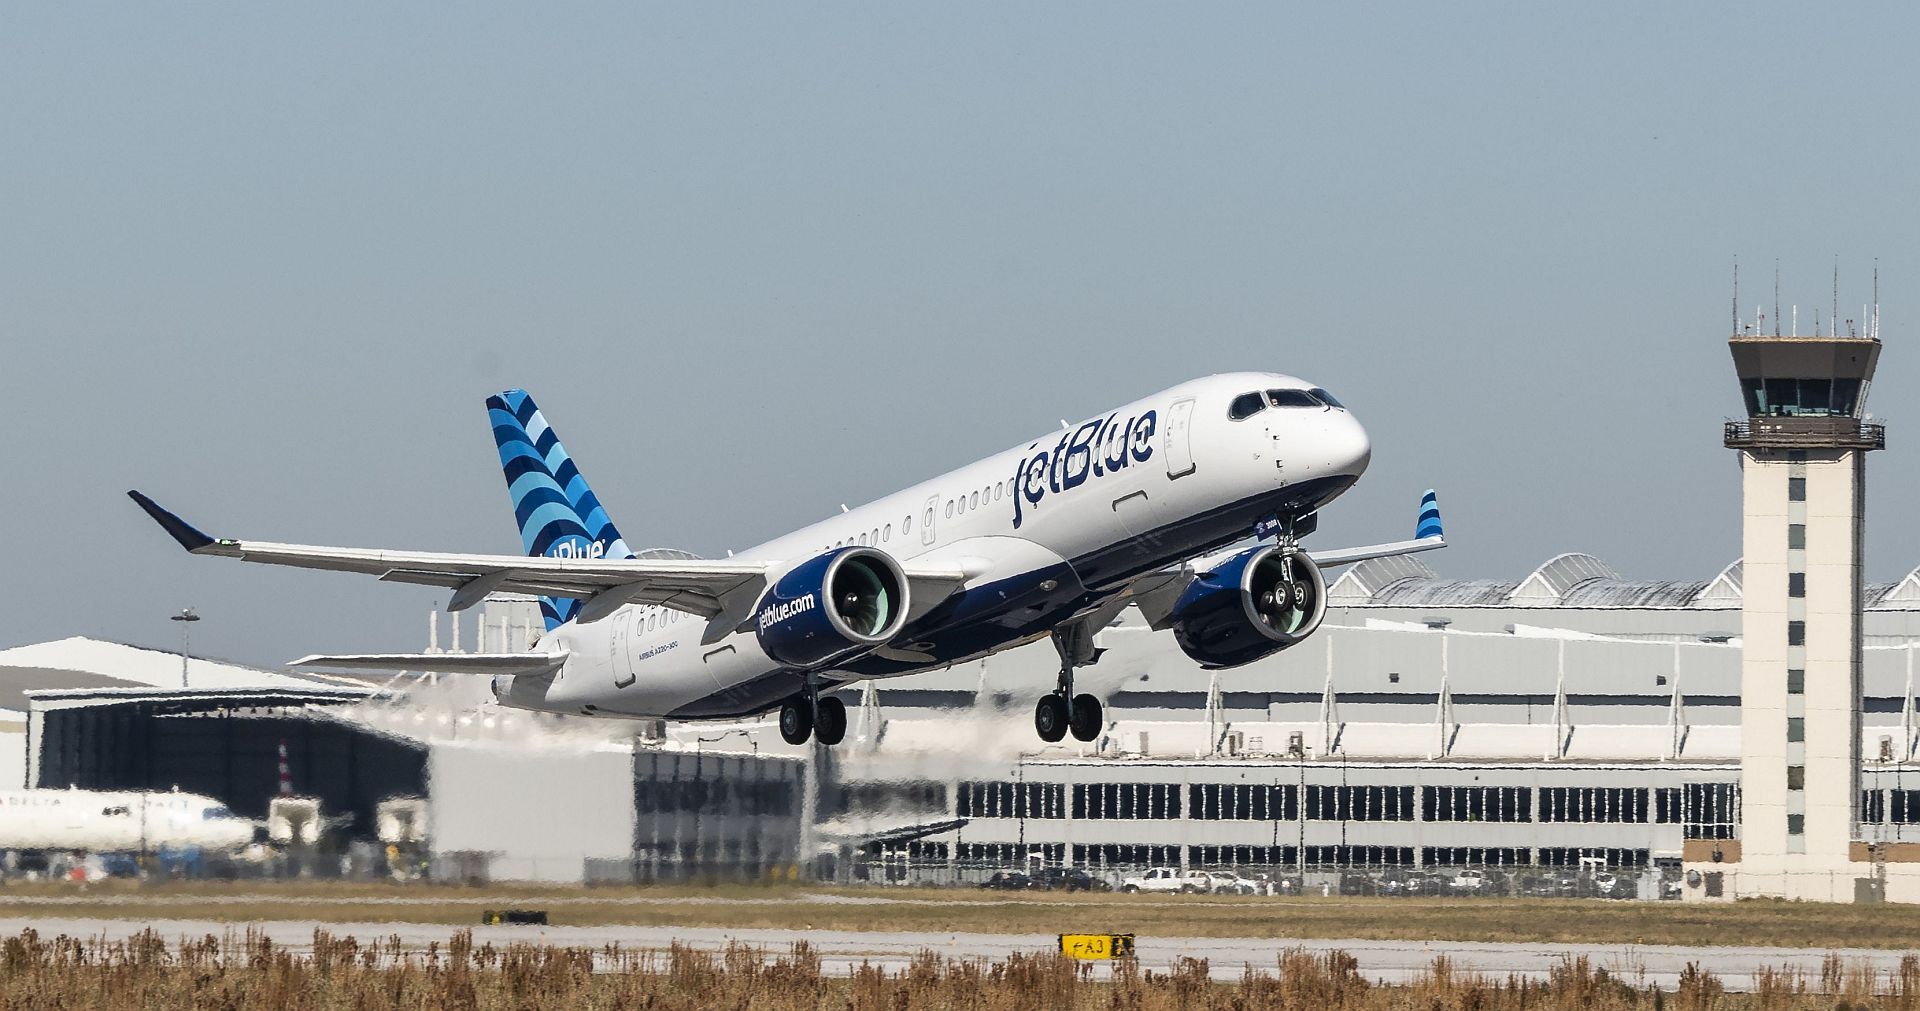 A220 300 For JetBlue Airways Has Completed Its Inaugural Test Flight From The Mobile Aeroplex